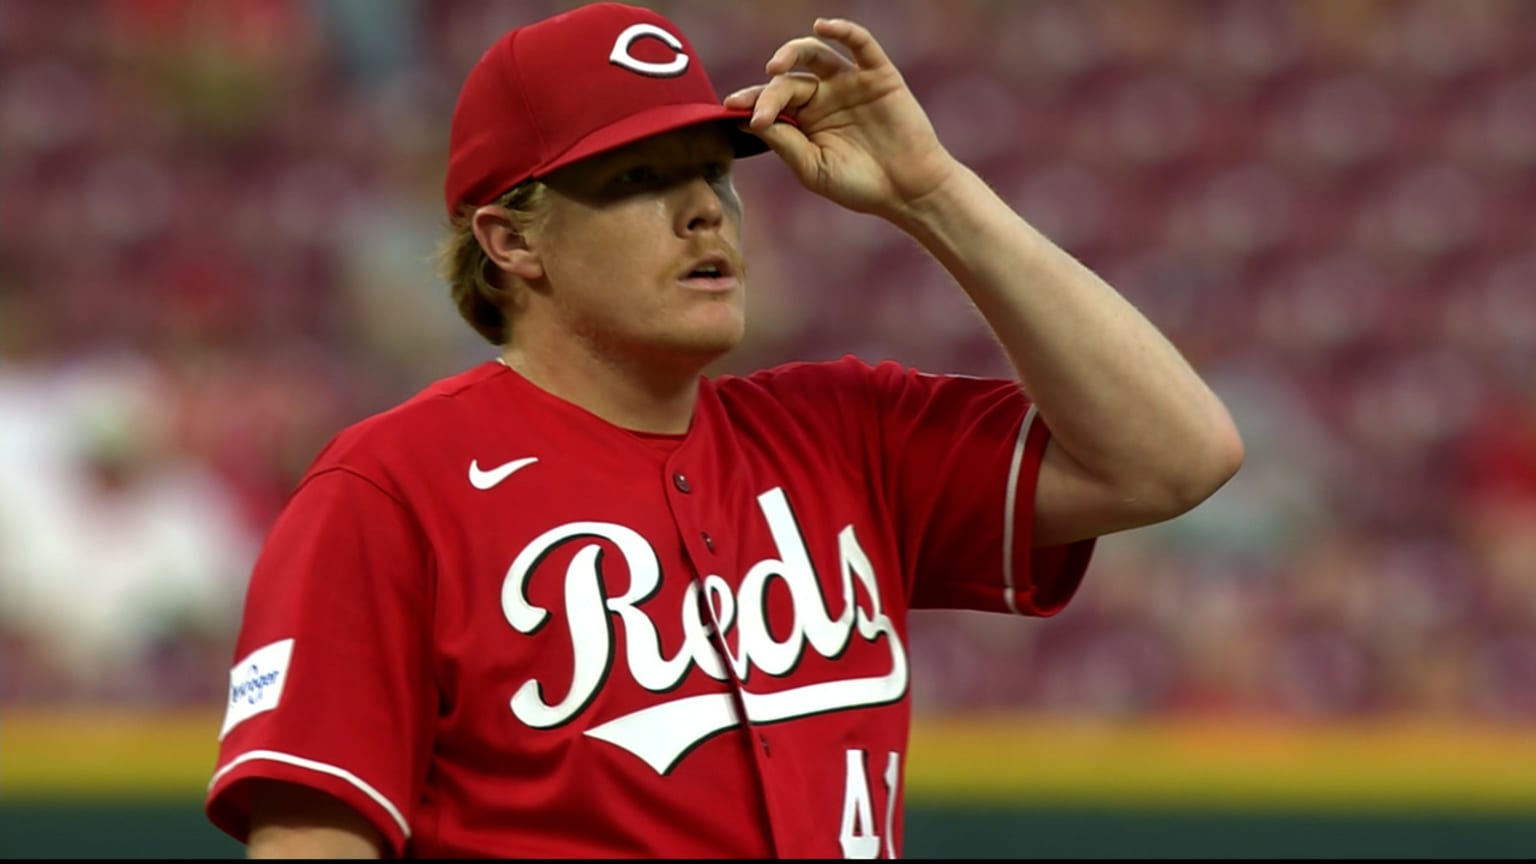 Reds debut new City Connect uniforms against Yankees at GABP